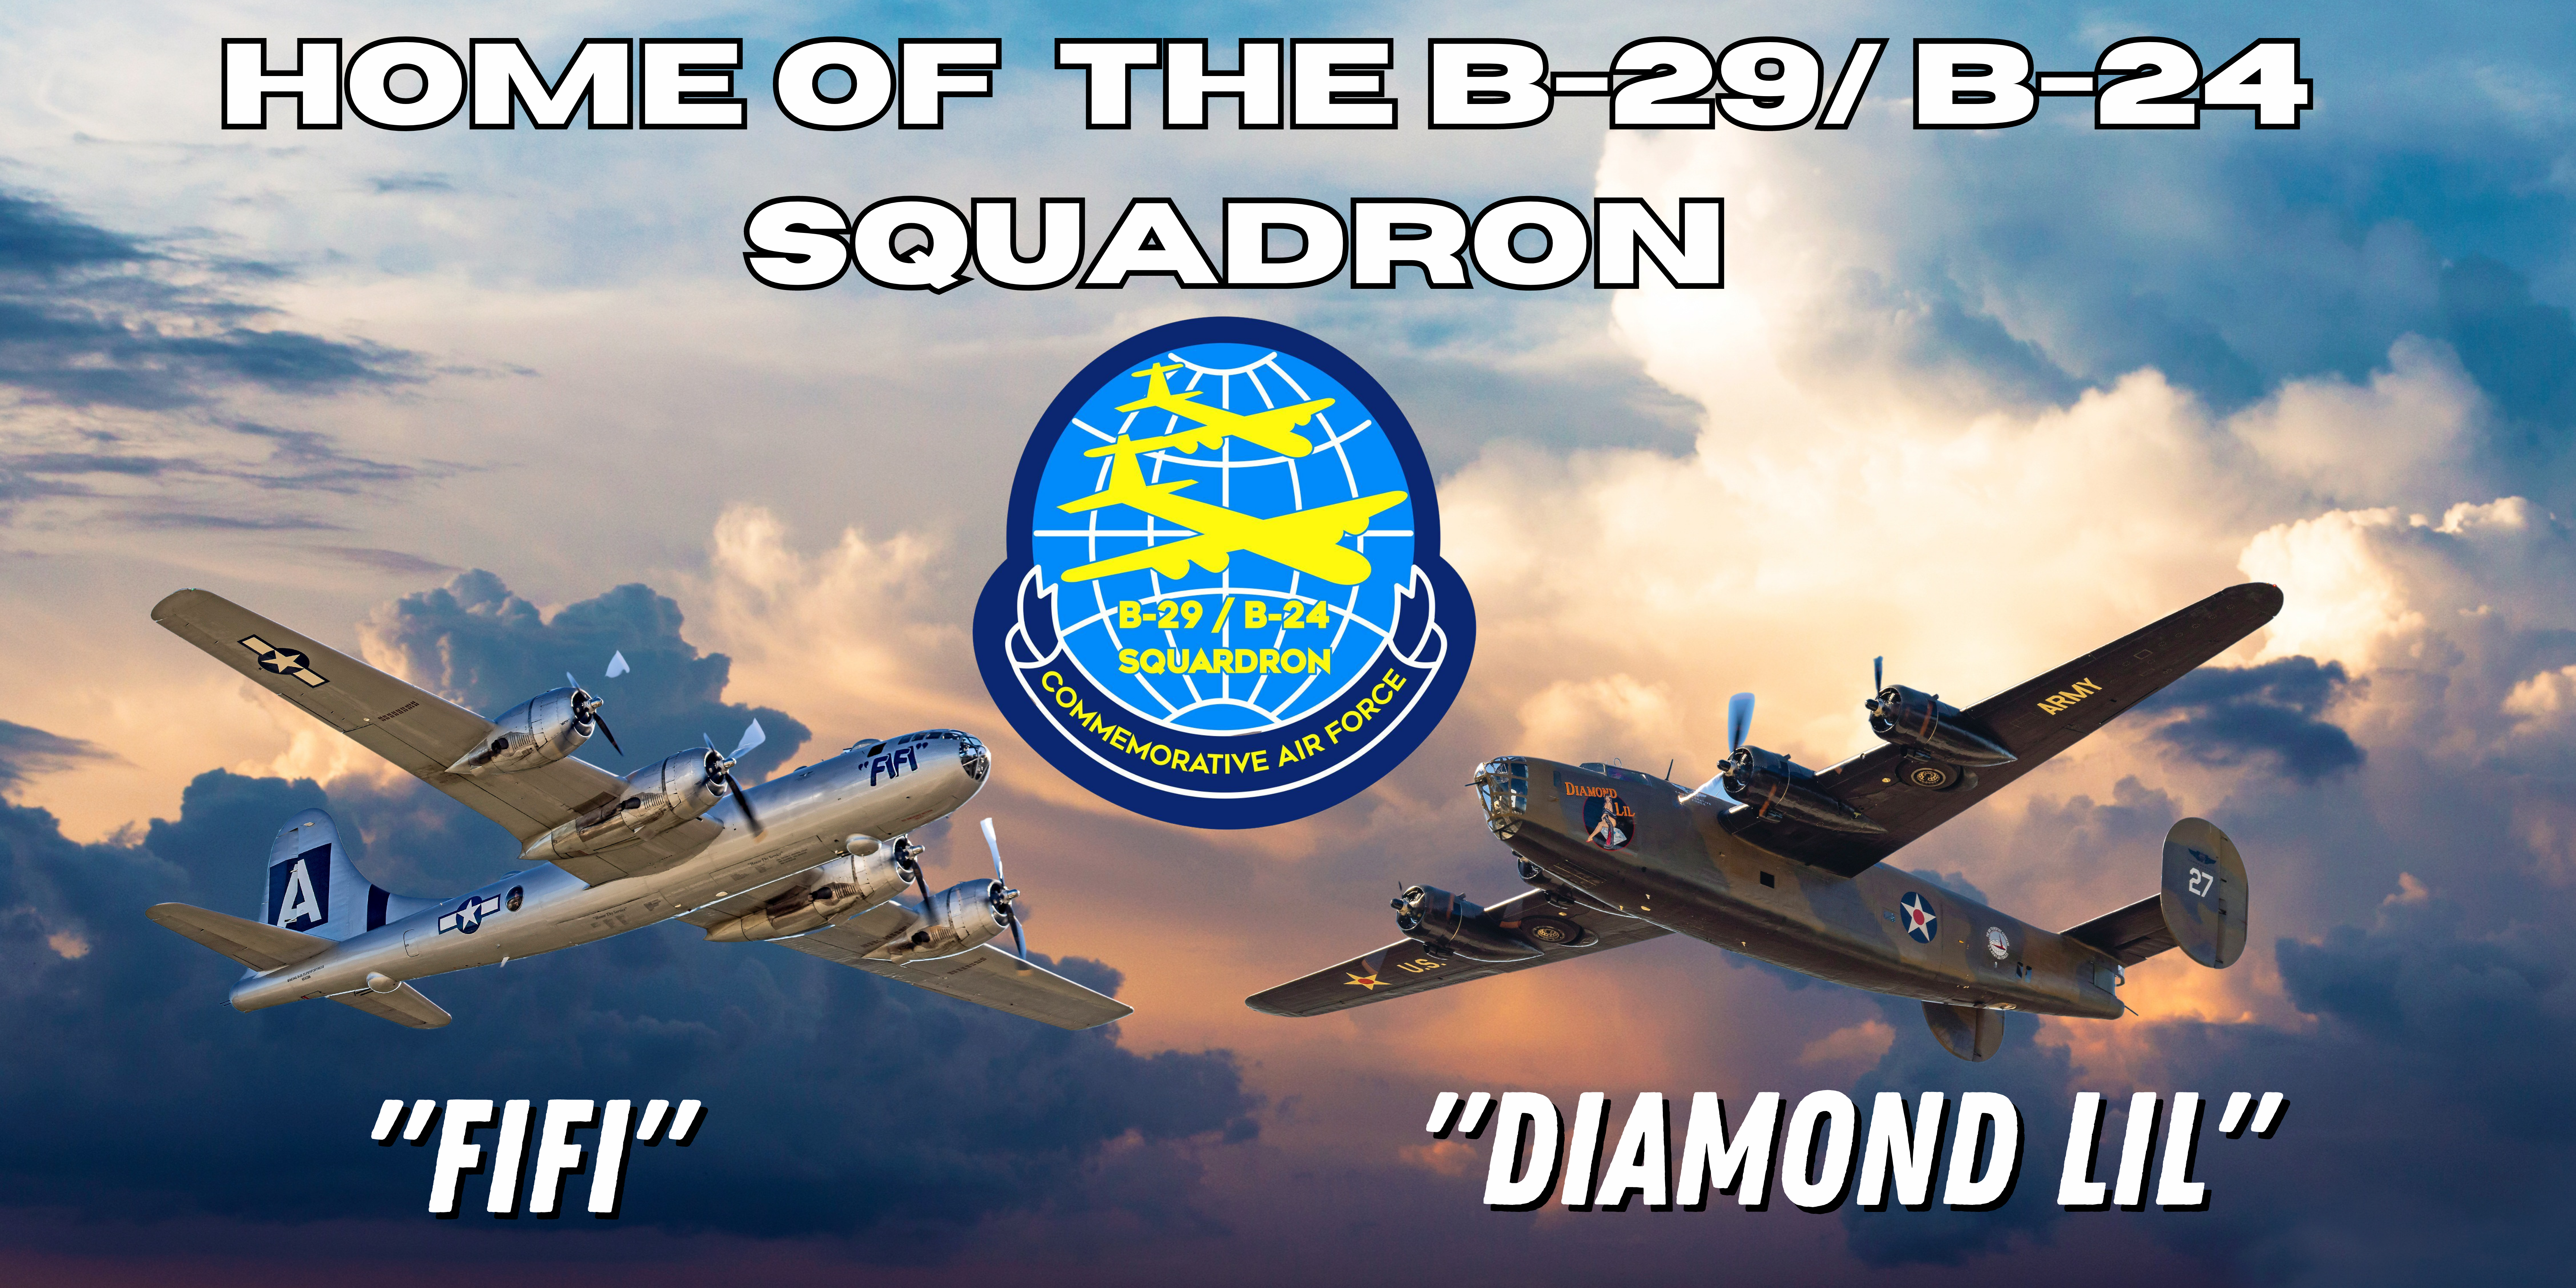 Home to the B-24, B-29 Squadron (Banner (Landscape))